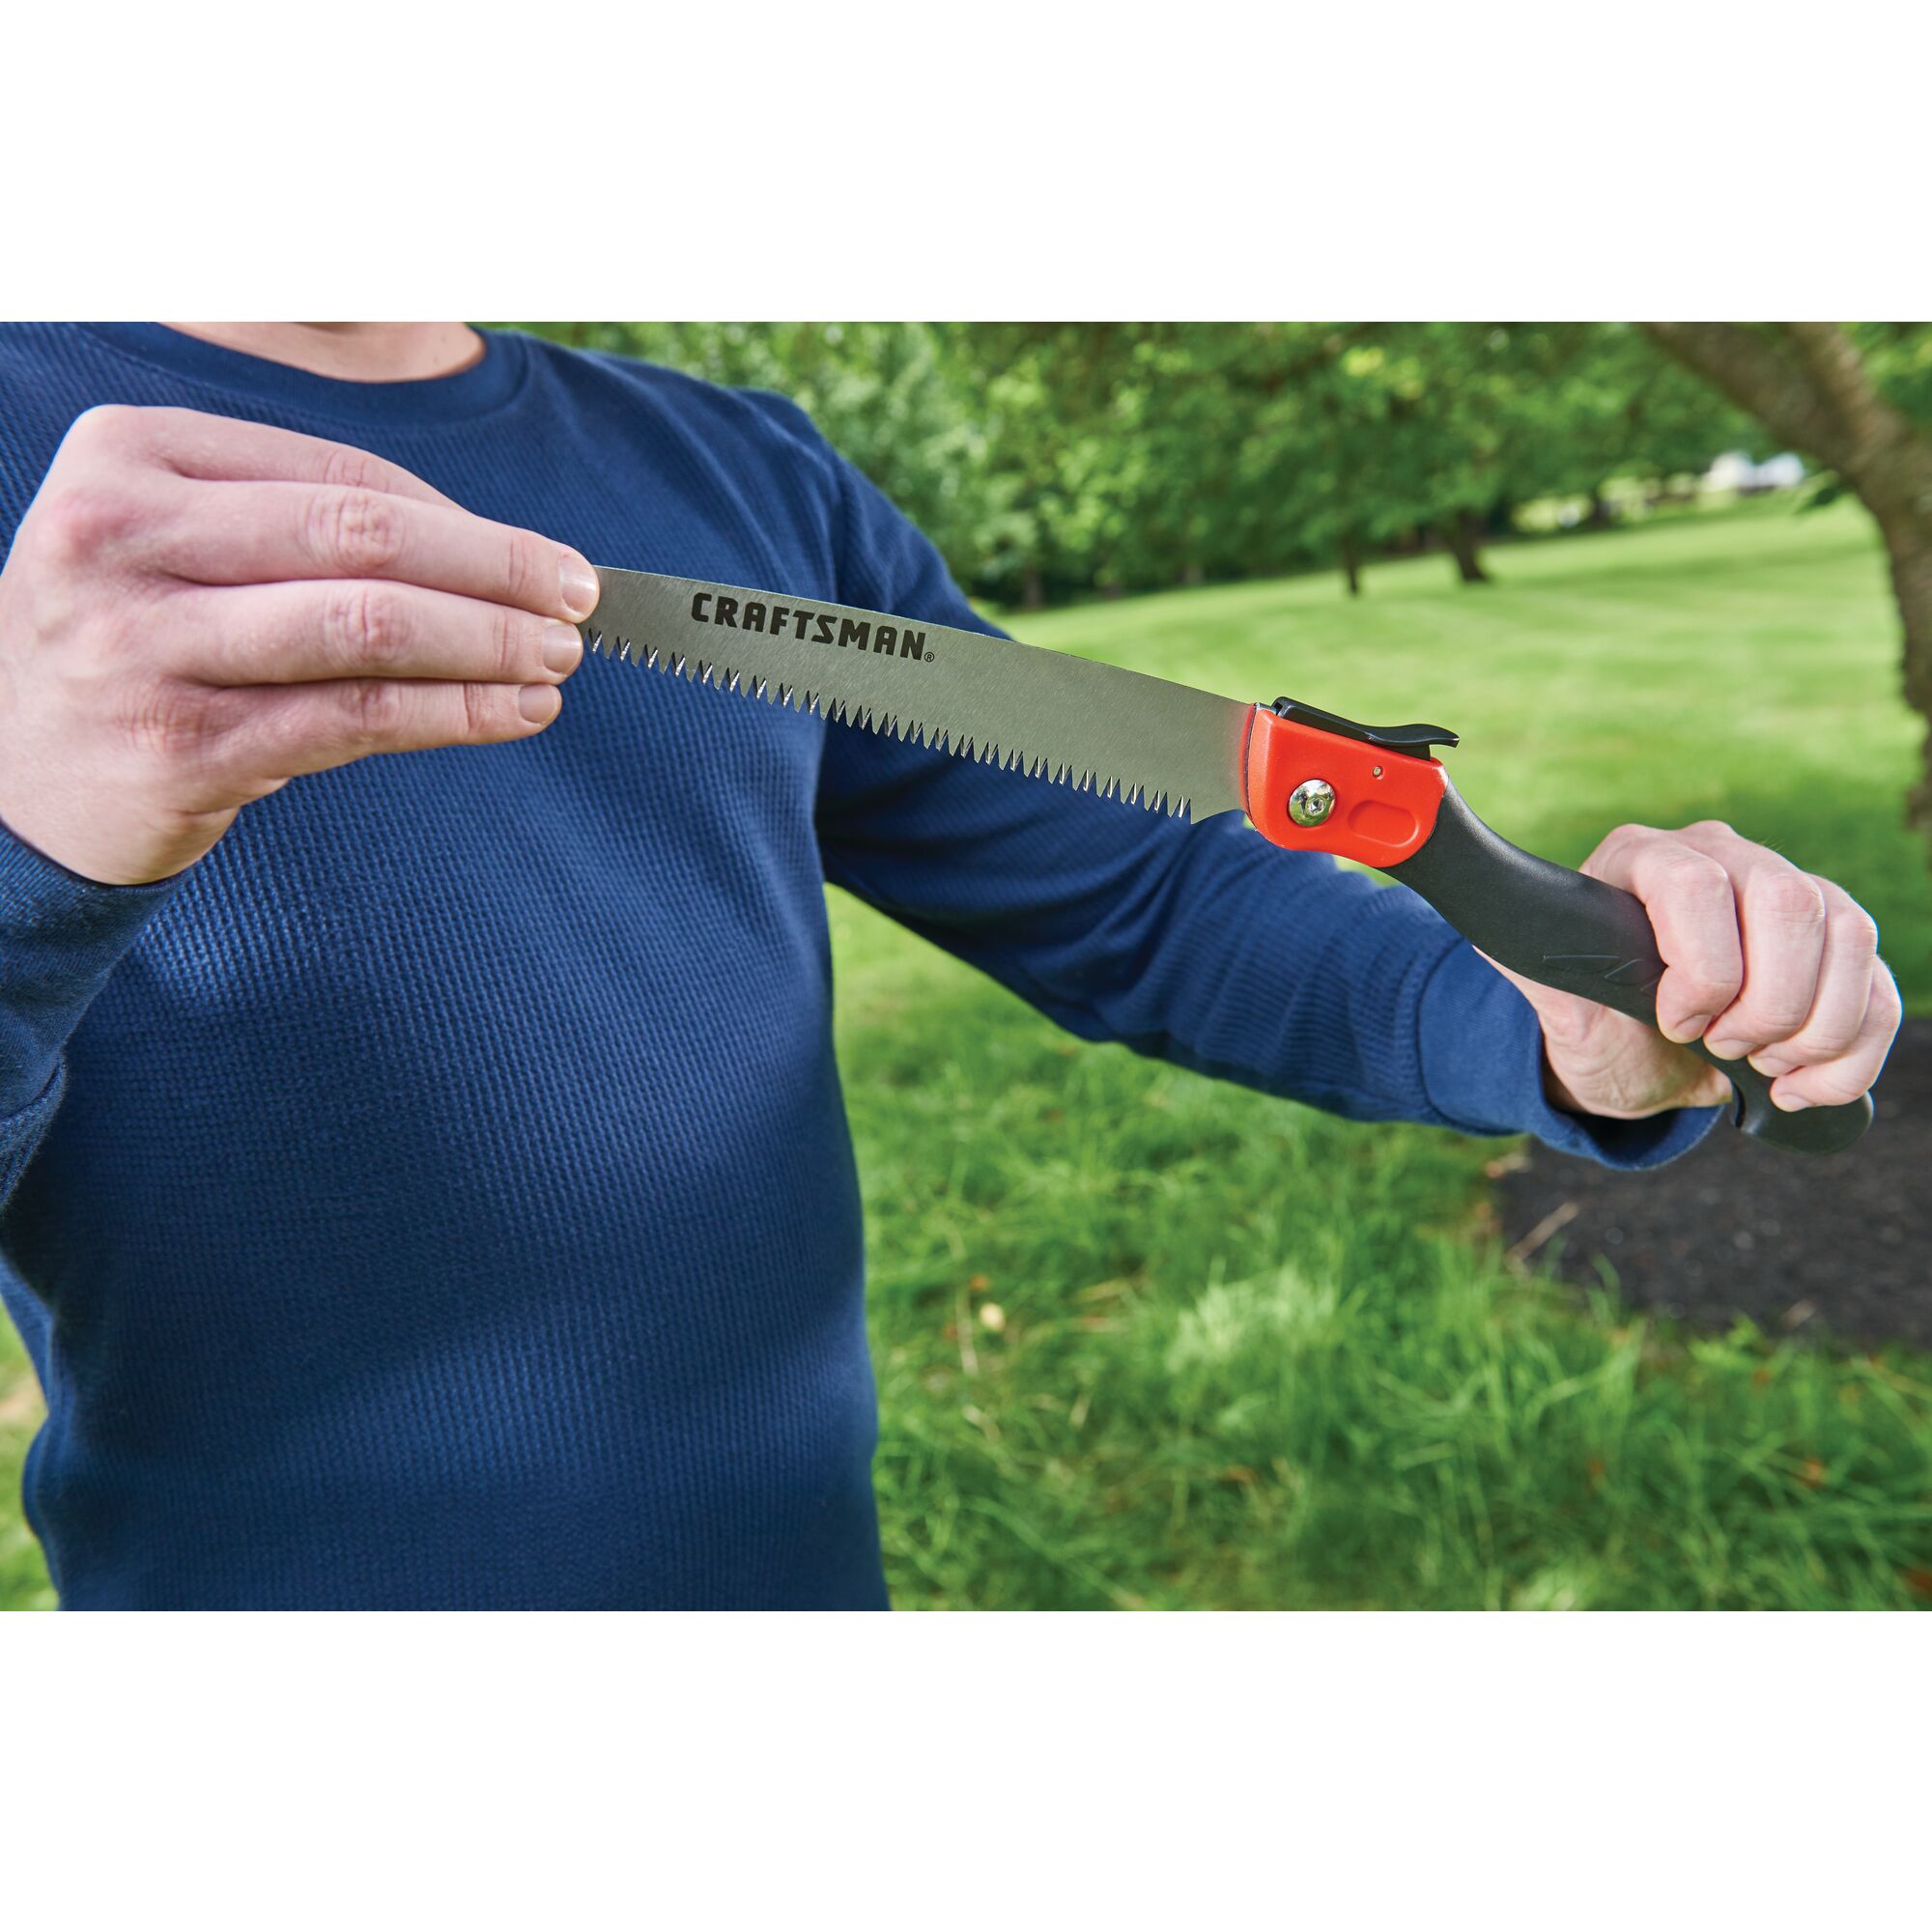 Folding saw being held by a person outdoors.